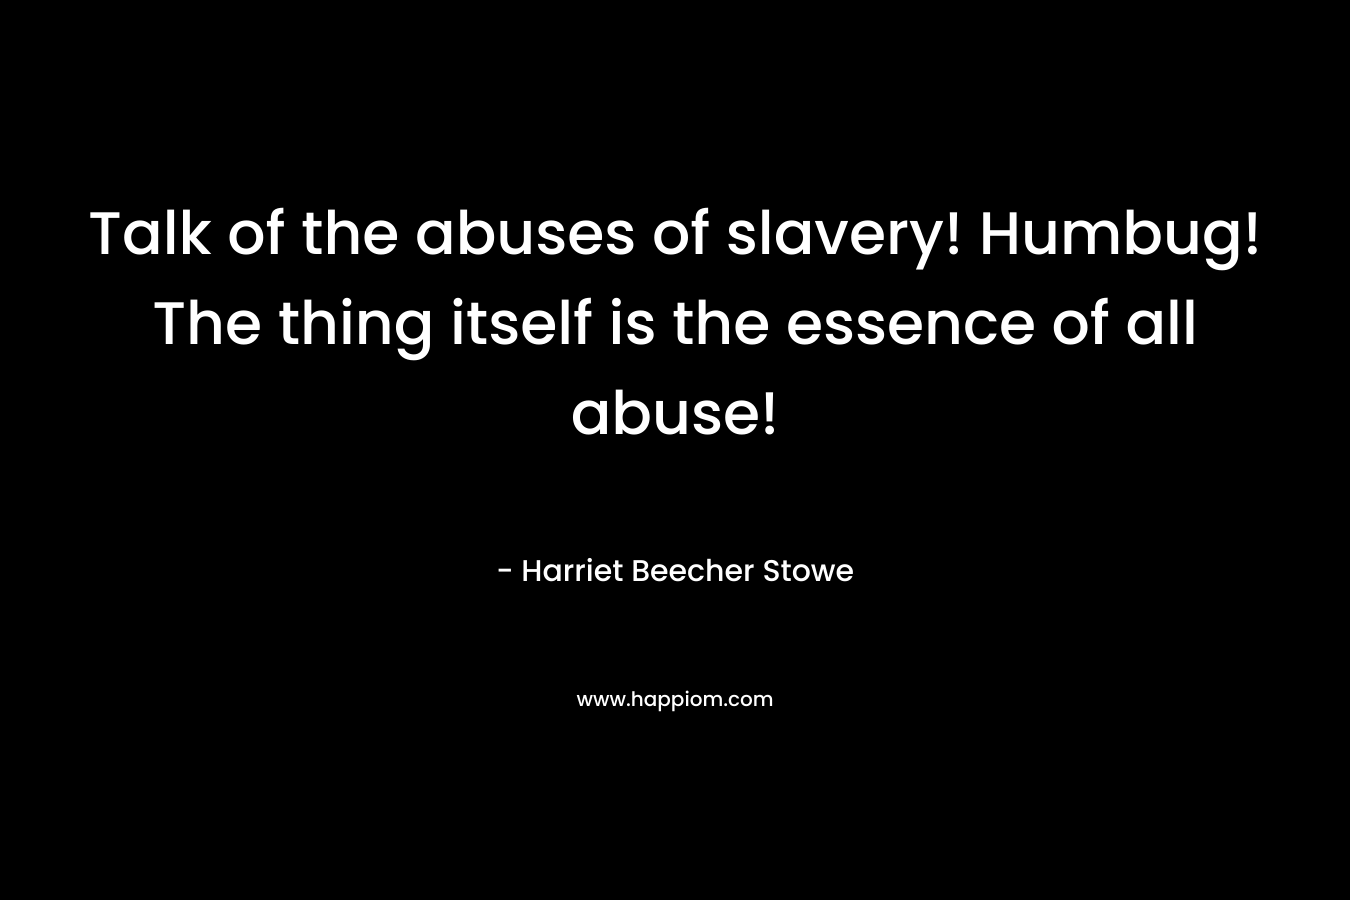 Talk of the abuses of slavery! Humbug! The thing itself is the essence of all abuse! – Harriet Beecher Stowe